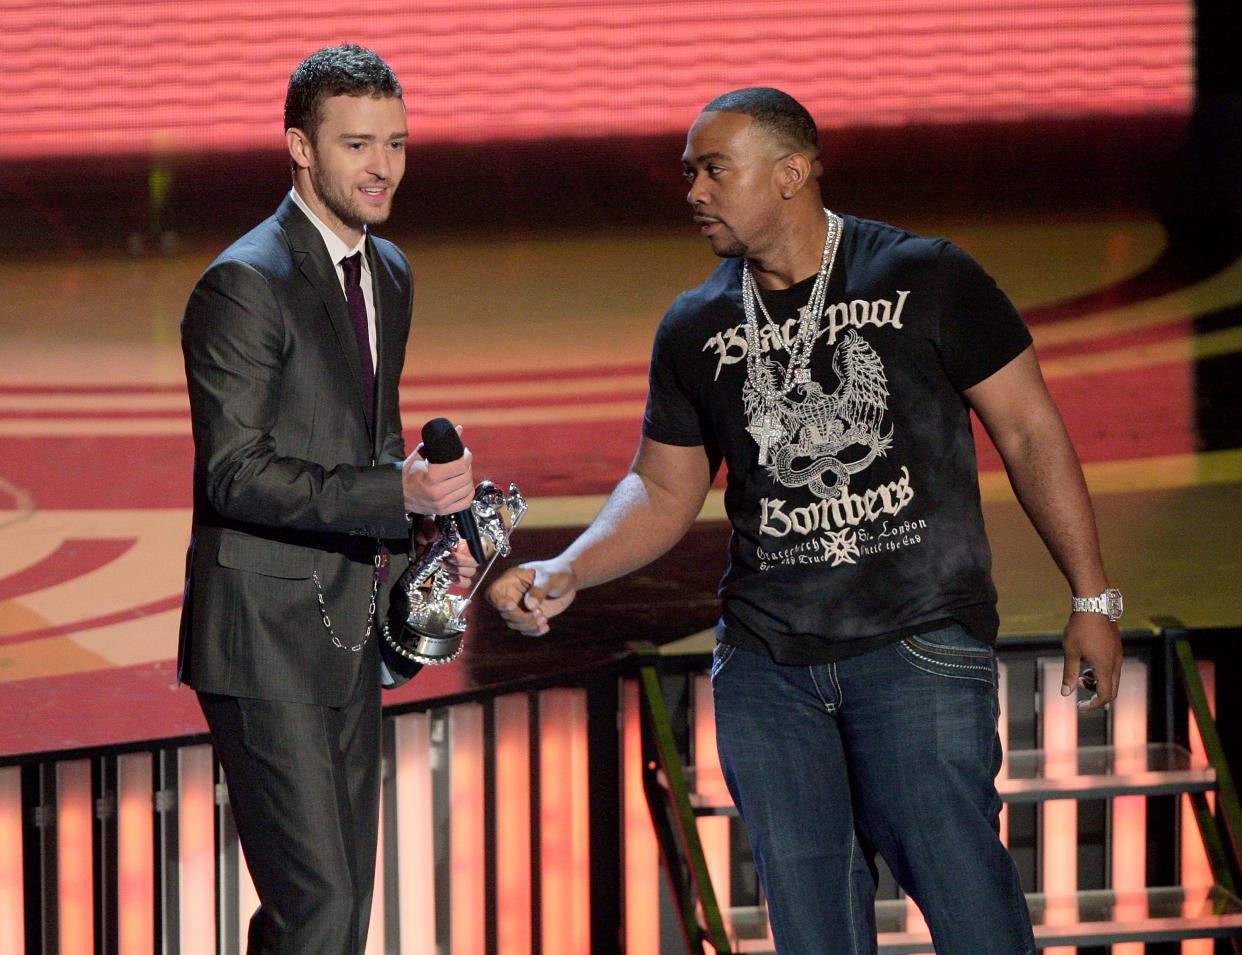 LAS VEGAS - SEPTEMBER 09:  Singers Justin Timberlake (L) and Timbaland speak on stage during the 2007 MTV Video Music Awards held at The Palms Hotel and Casino on September 9, 2007 in Las Vegas, Nevada.  (Photo by Kevin Winter/Getty Images)